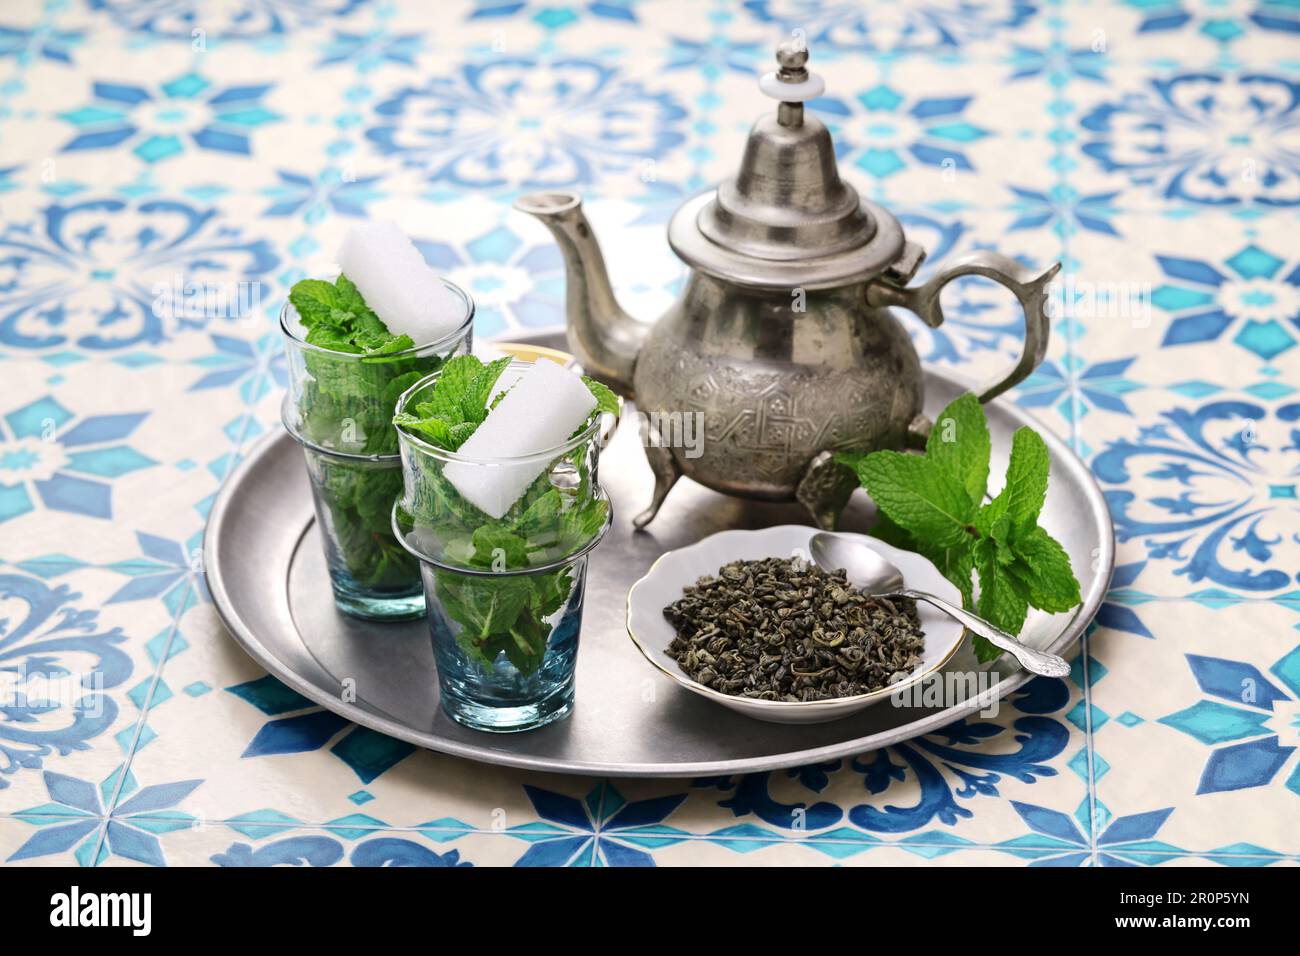 traditional Moroccan mint and sugar tea with a silver teapot Stock Photo